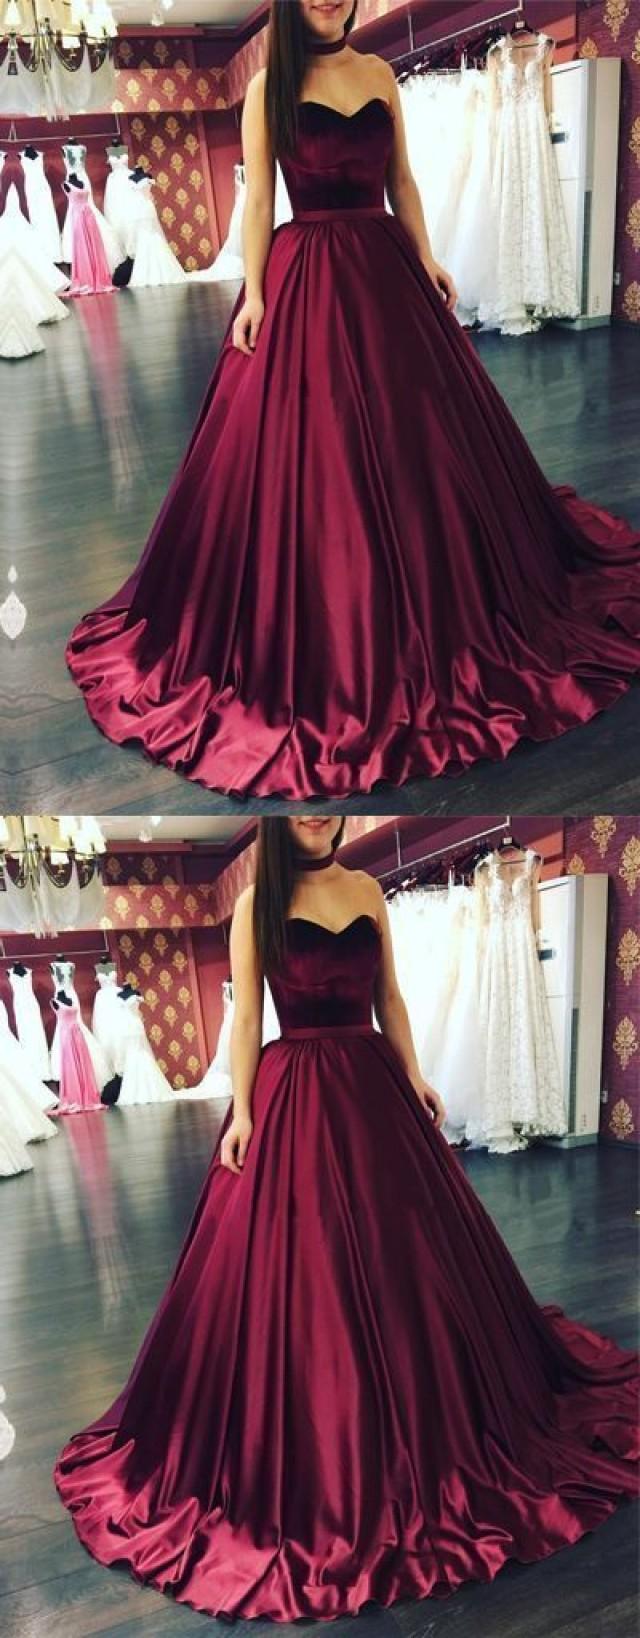 Fashion A-Line Sweetheart Burgundy Ball Gown Long Prom Evening Dress ...